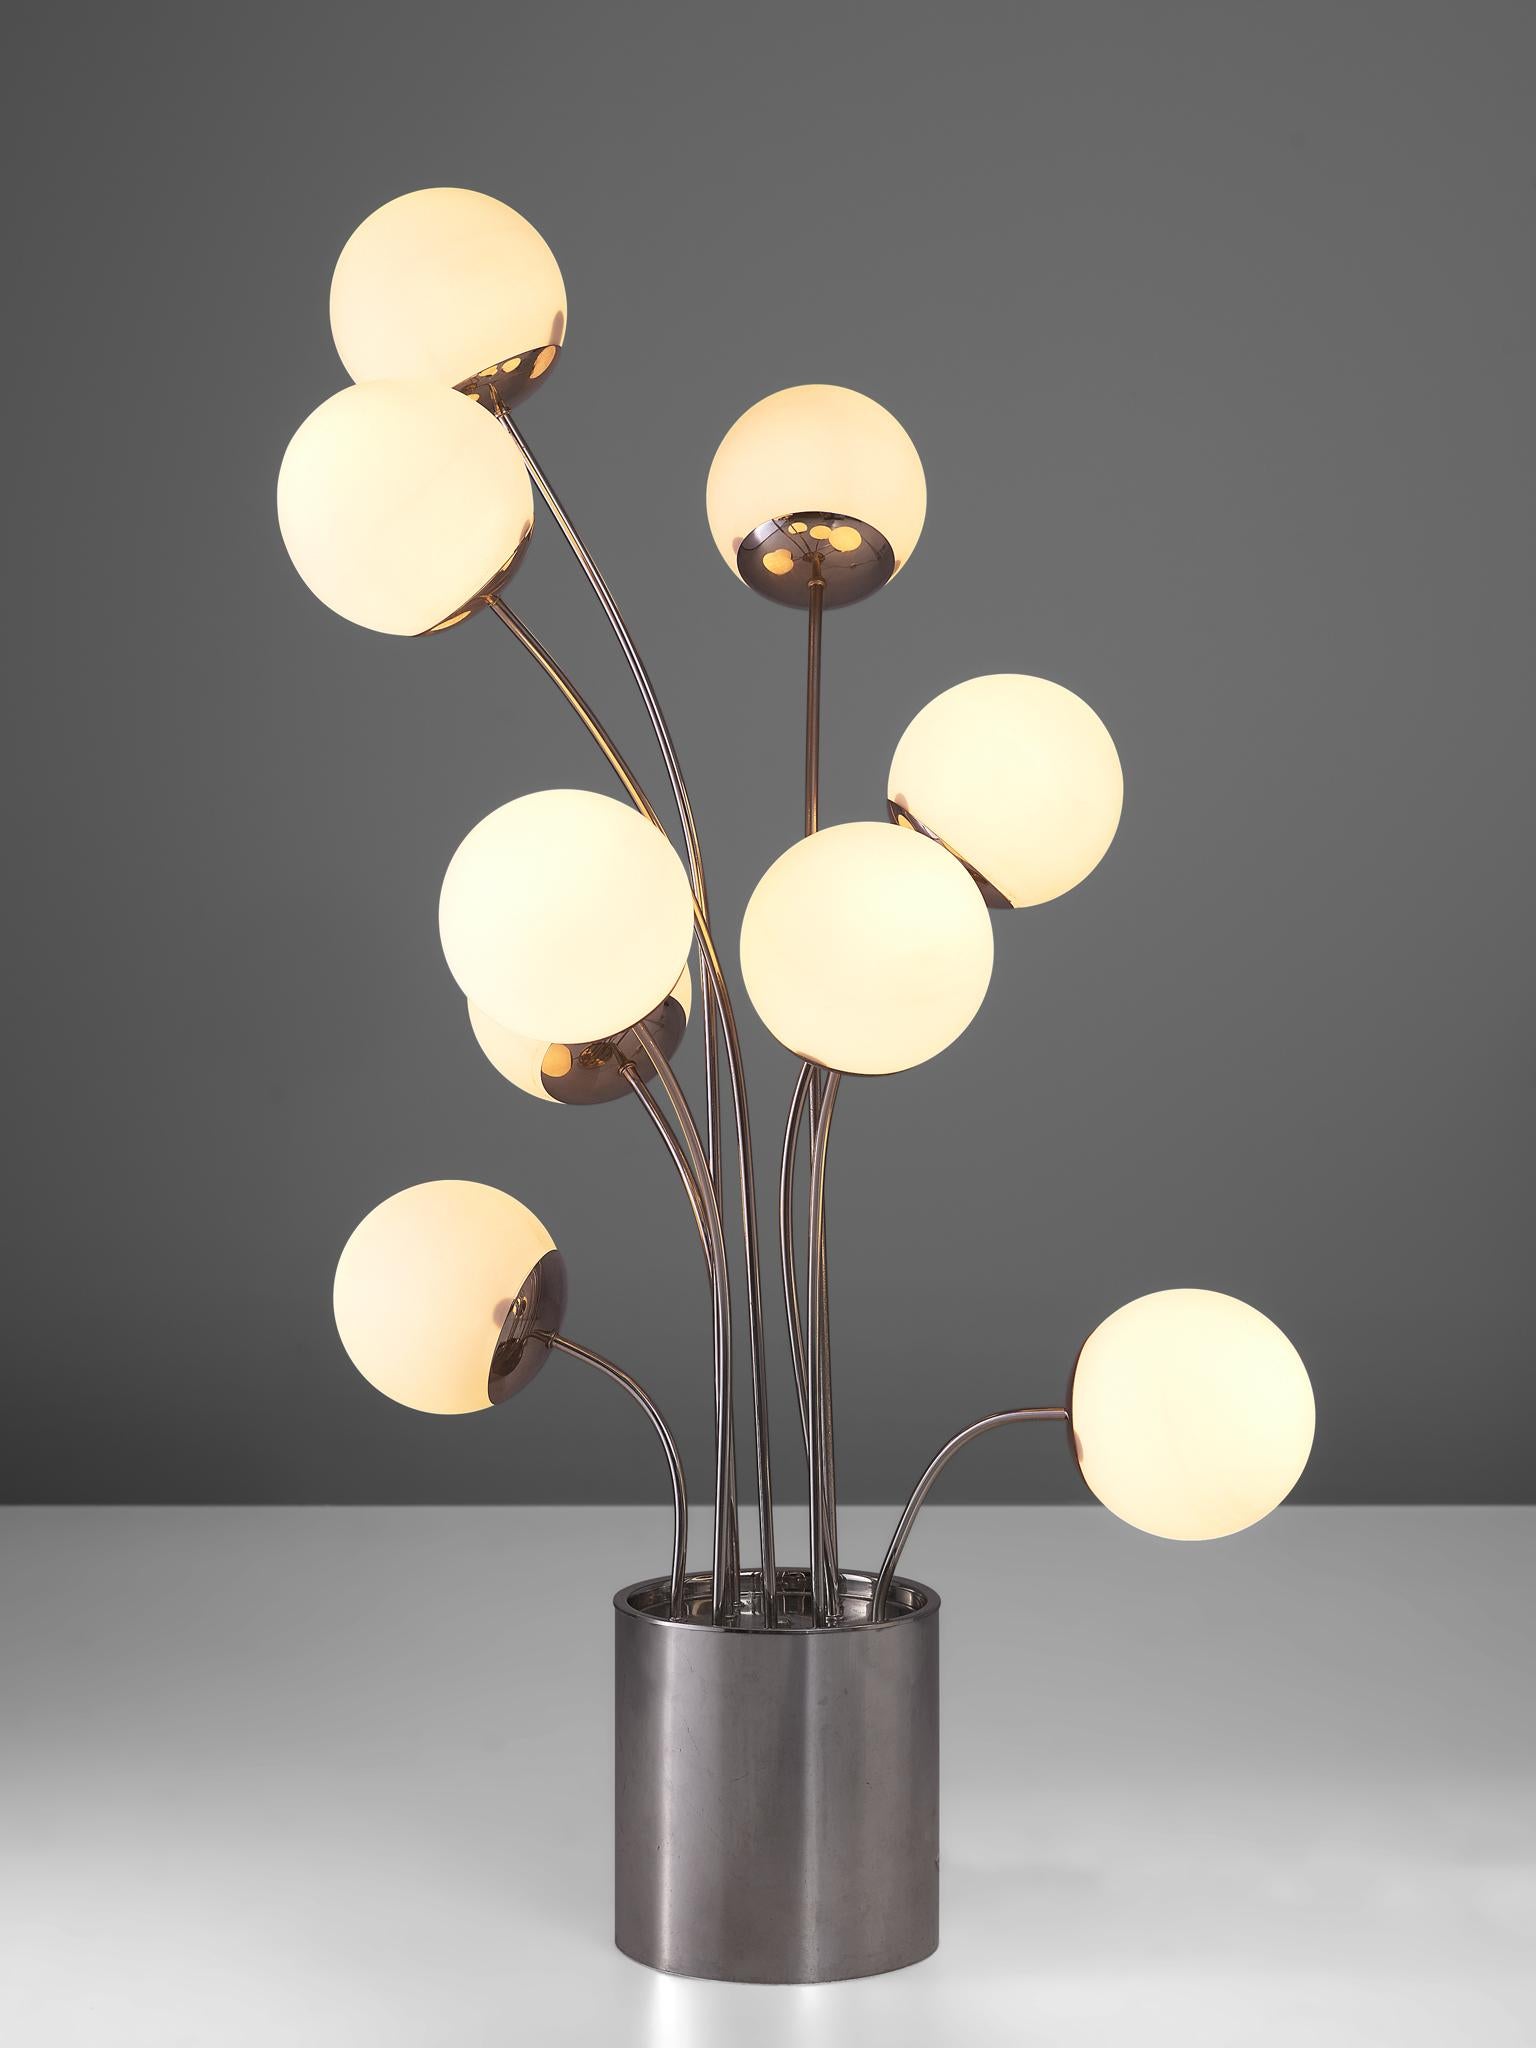 Pia Guidetti Crippa for Lumi, table lamp, chrome and opaline glass, Italy, 1970s.

A dynamic table lamp that features nine stems emanating from the chrome base. Each stem holds an opaline glass globe shade. The have a frivolous appearance and